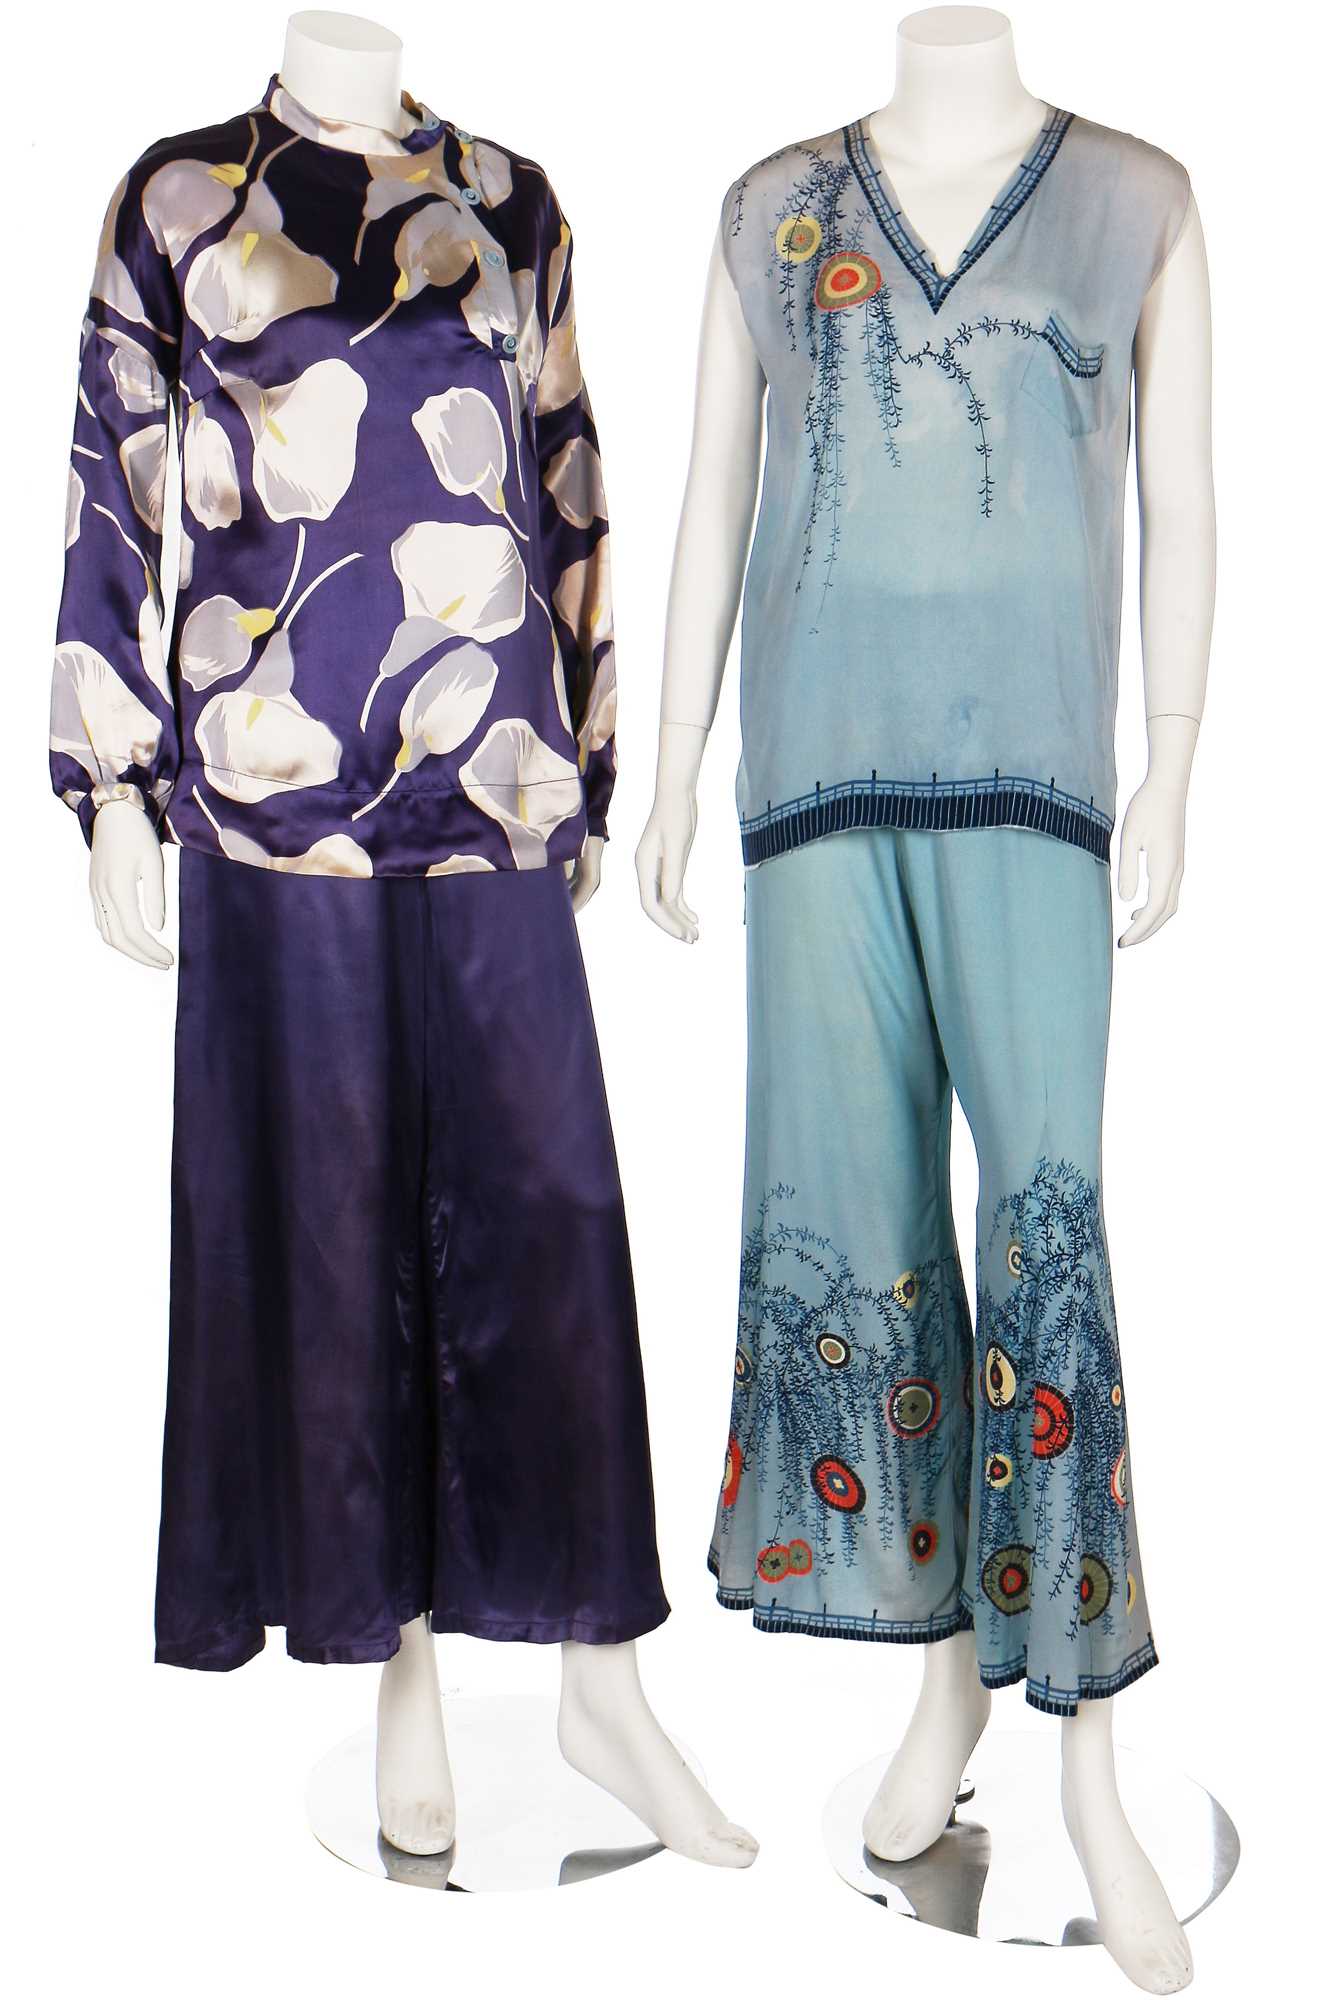 Lot 12 - A group of lounging pyjamas, playsuits and Japanese inspired lingerie, 1920s-30s